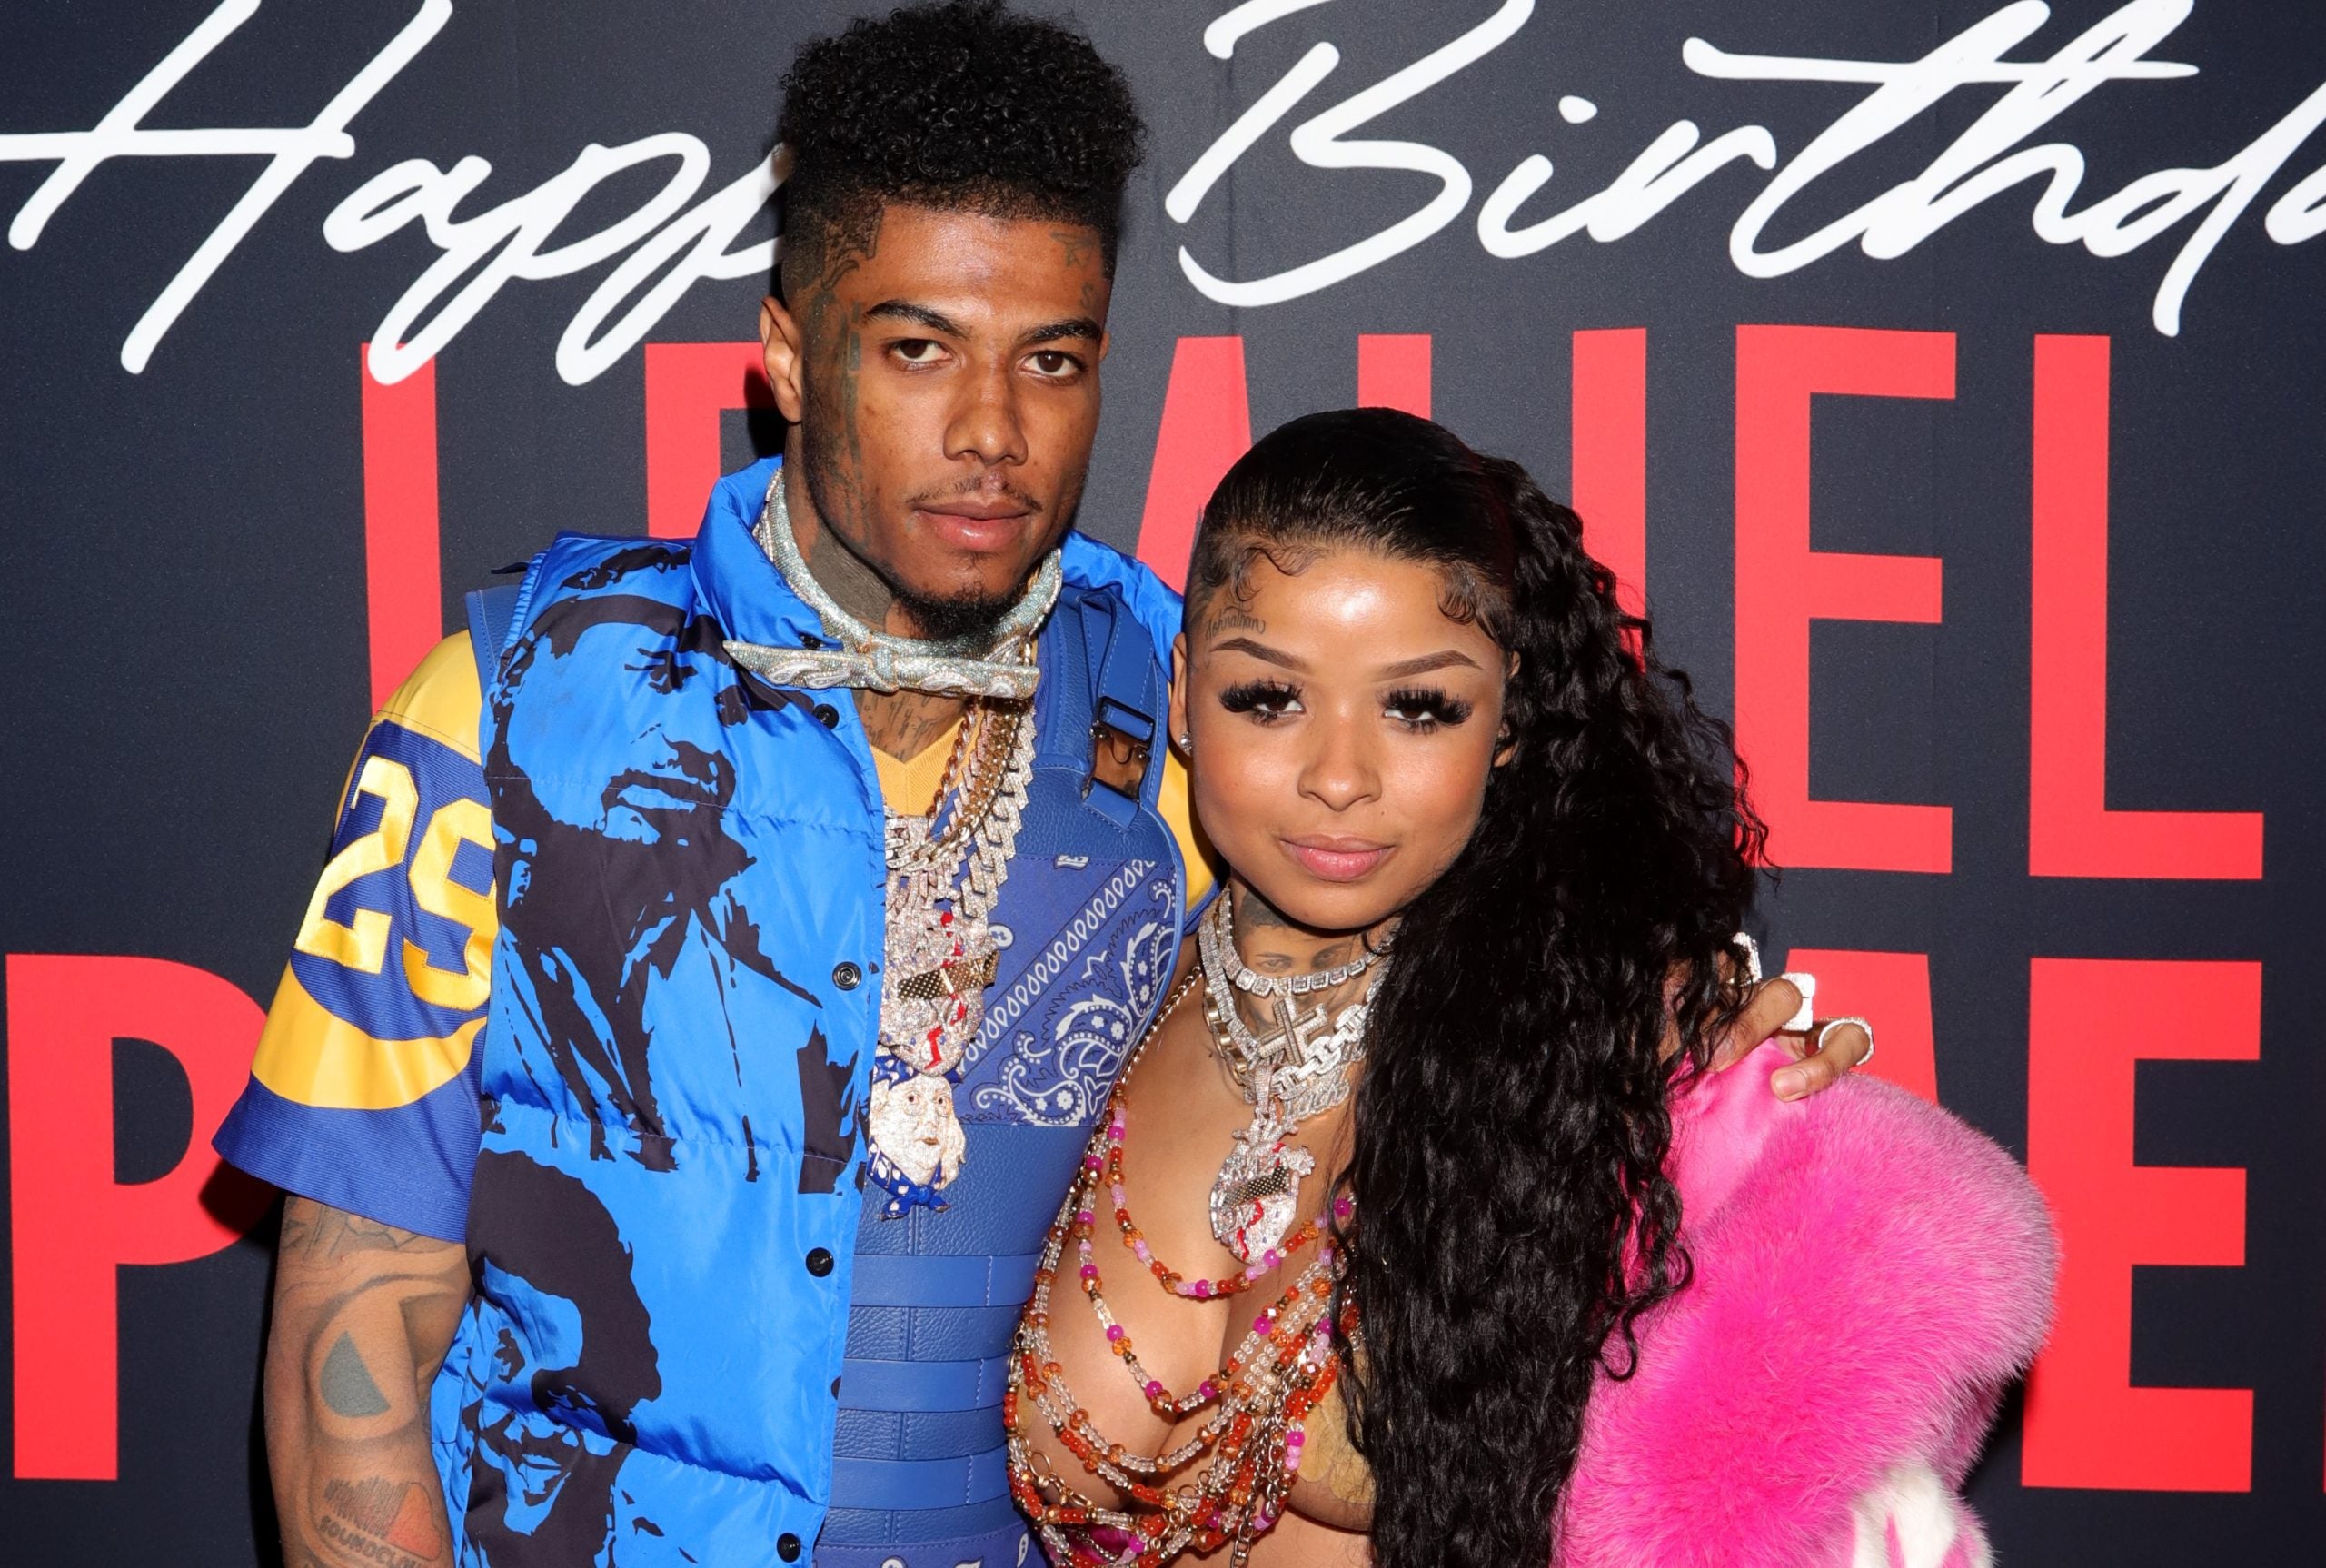 Op-Ed: I Don’t Care For Blueface And Chrisean — But I Do Care About The Well-Being Of Their Child